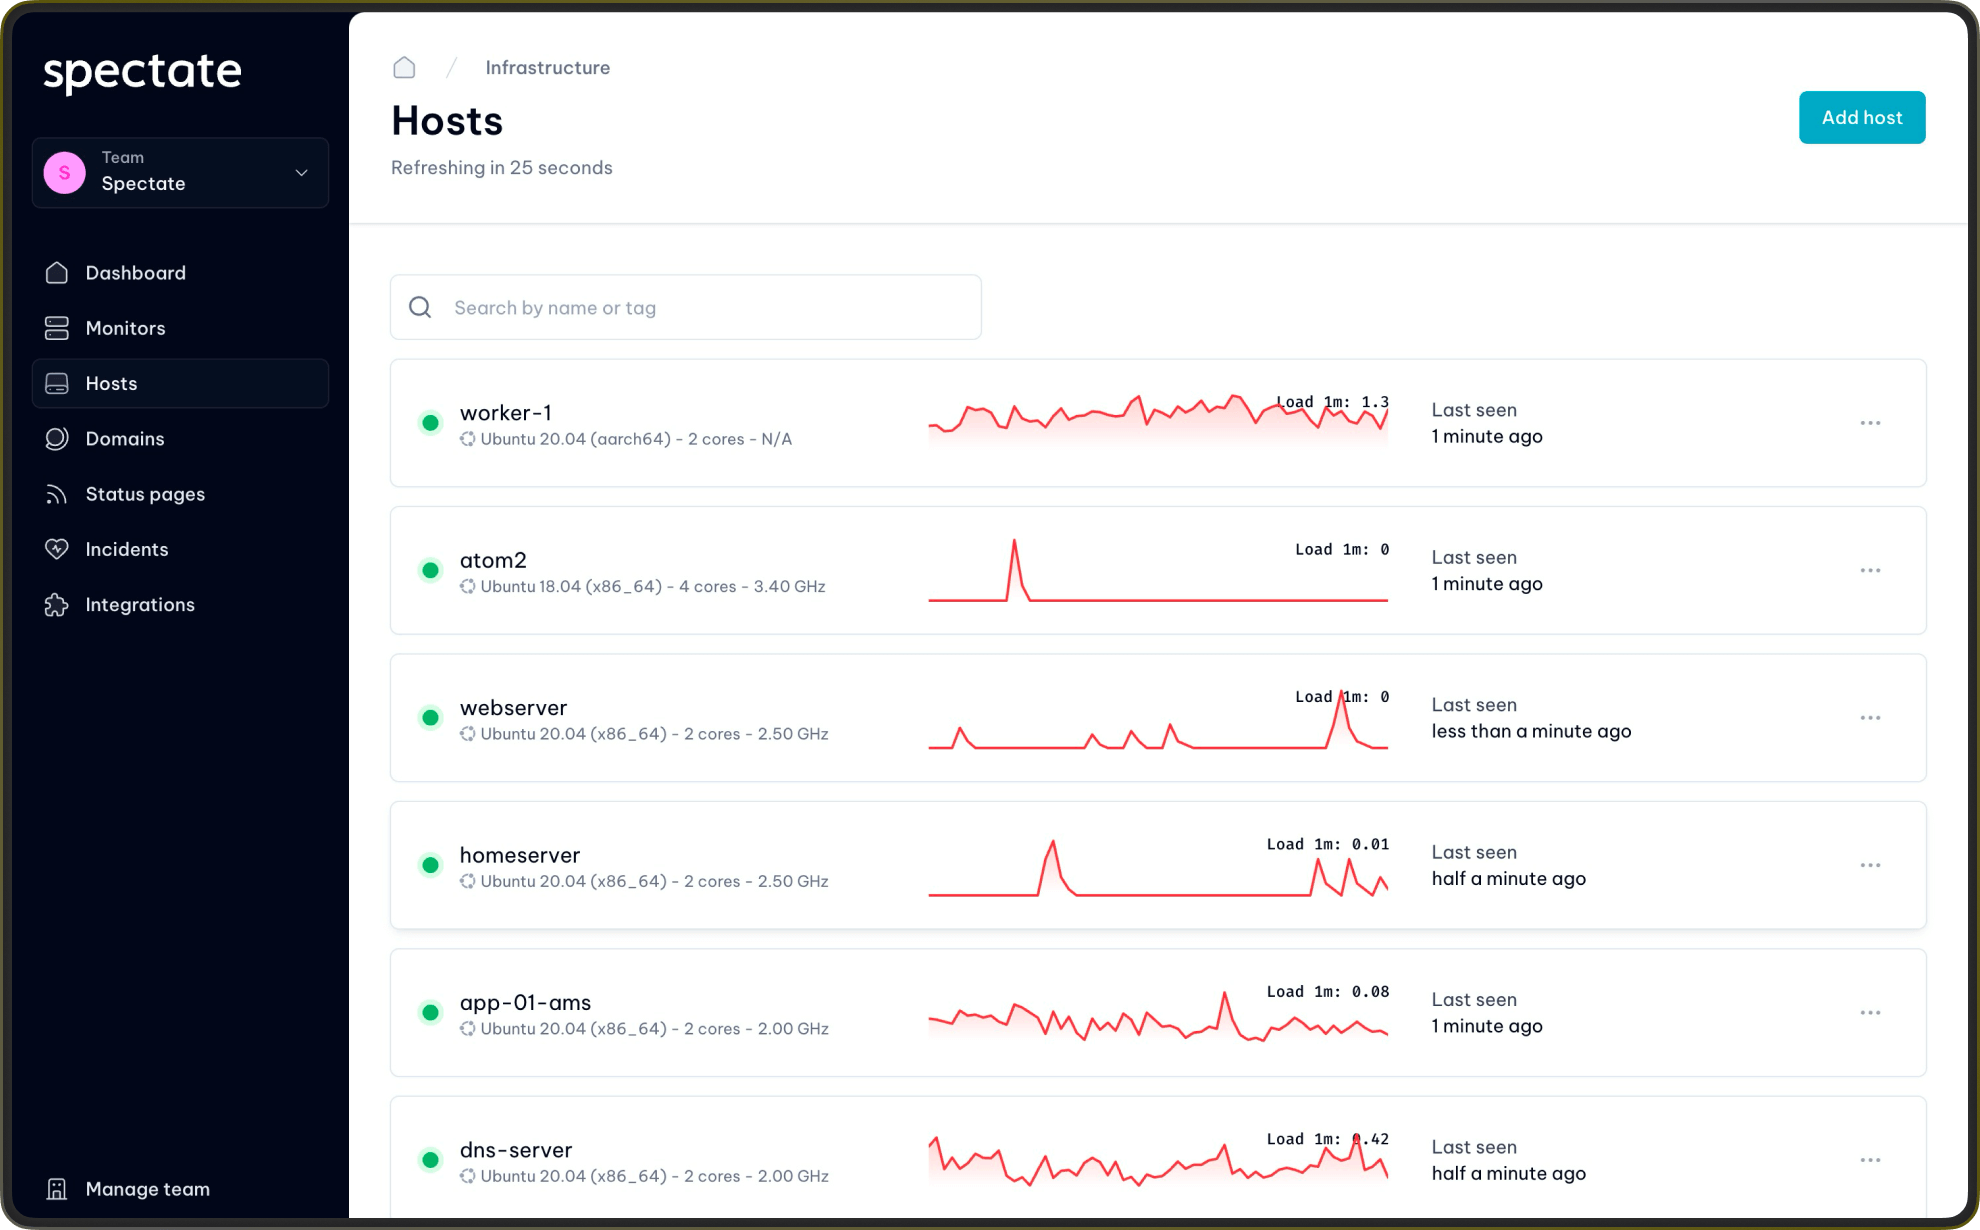 A screenshot of the Spectate infrastructure monitoring dashboard